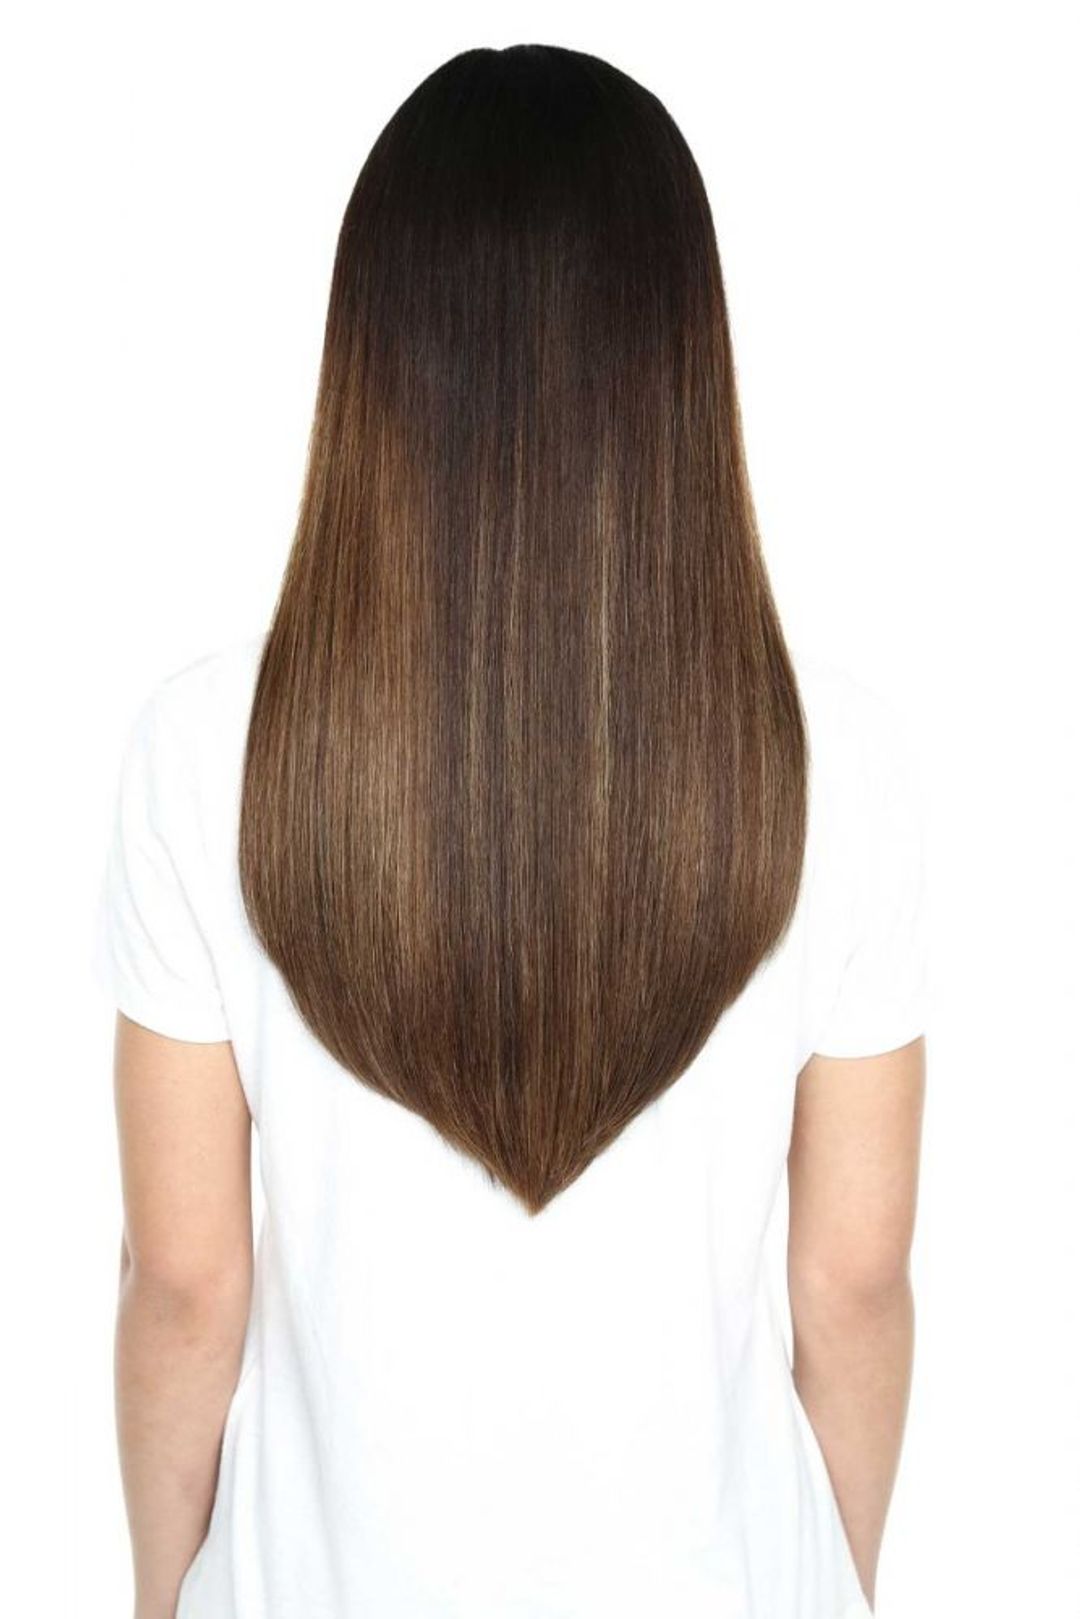 Beauty Works Gold Double Weft Extensions - Amber,18"